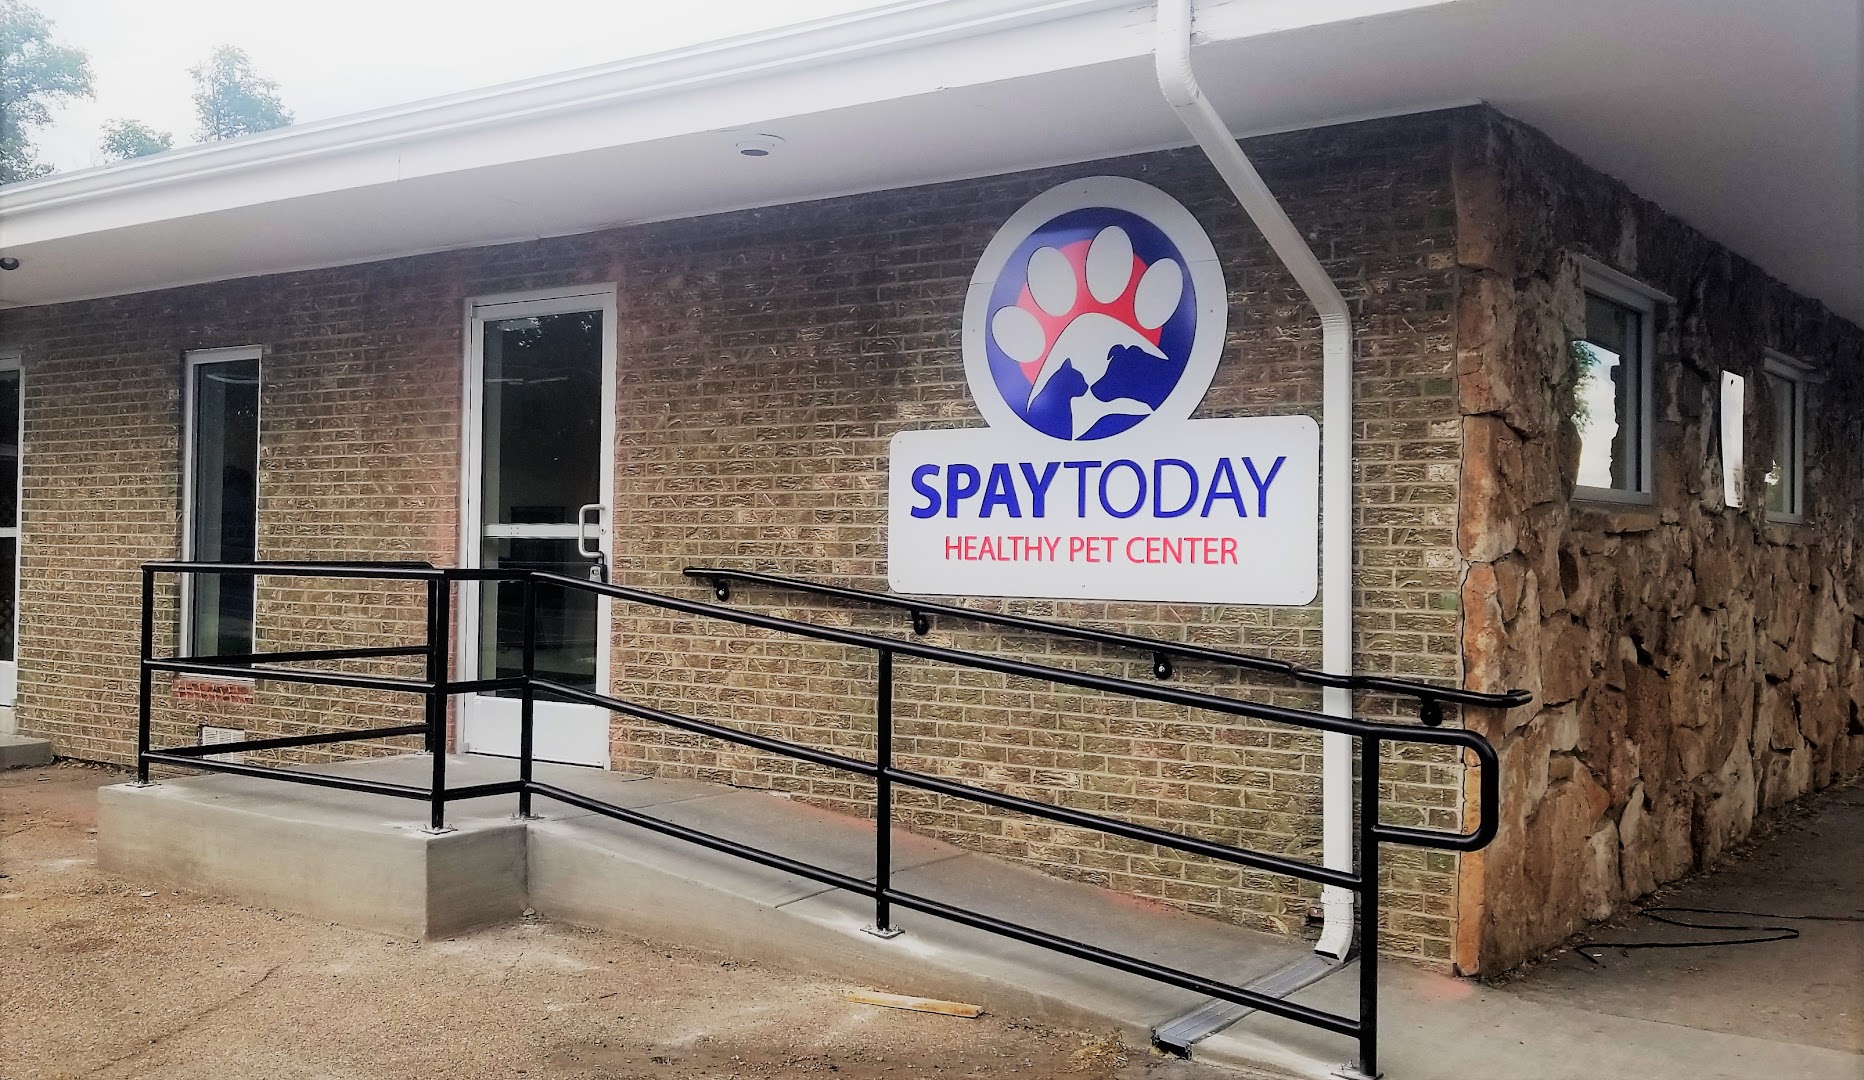 SpayToday Healthy Pet Center